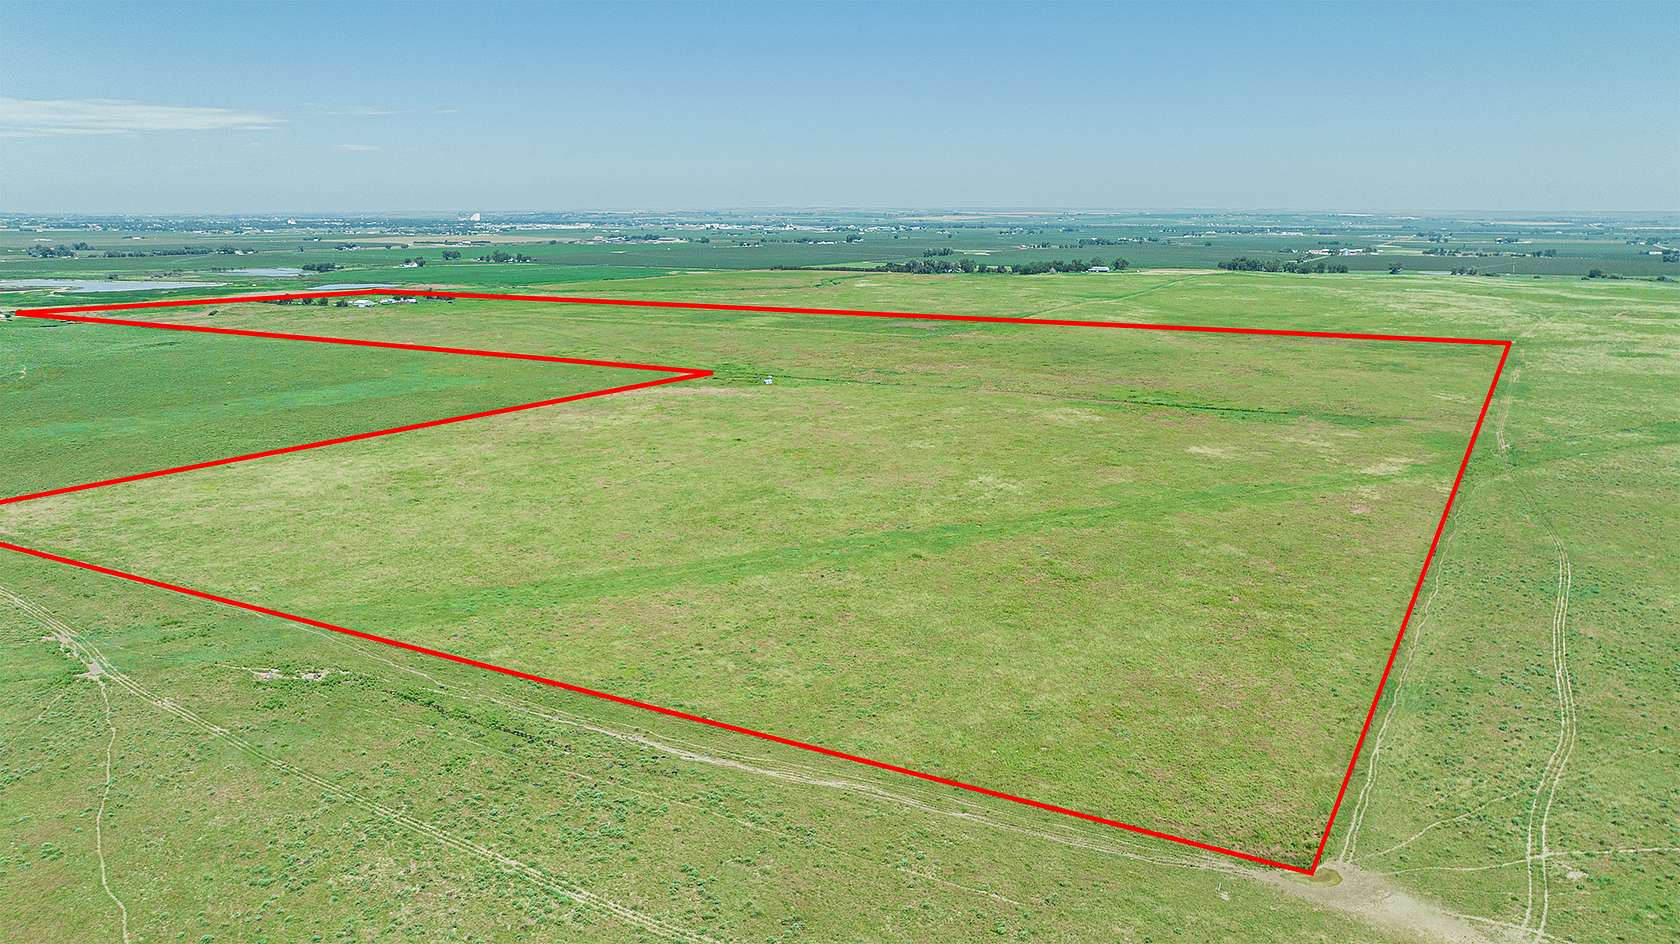 160 Acres of Recreational Land & Farm for Sale in Fort Morgan, Colorado